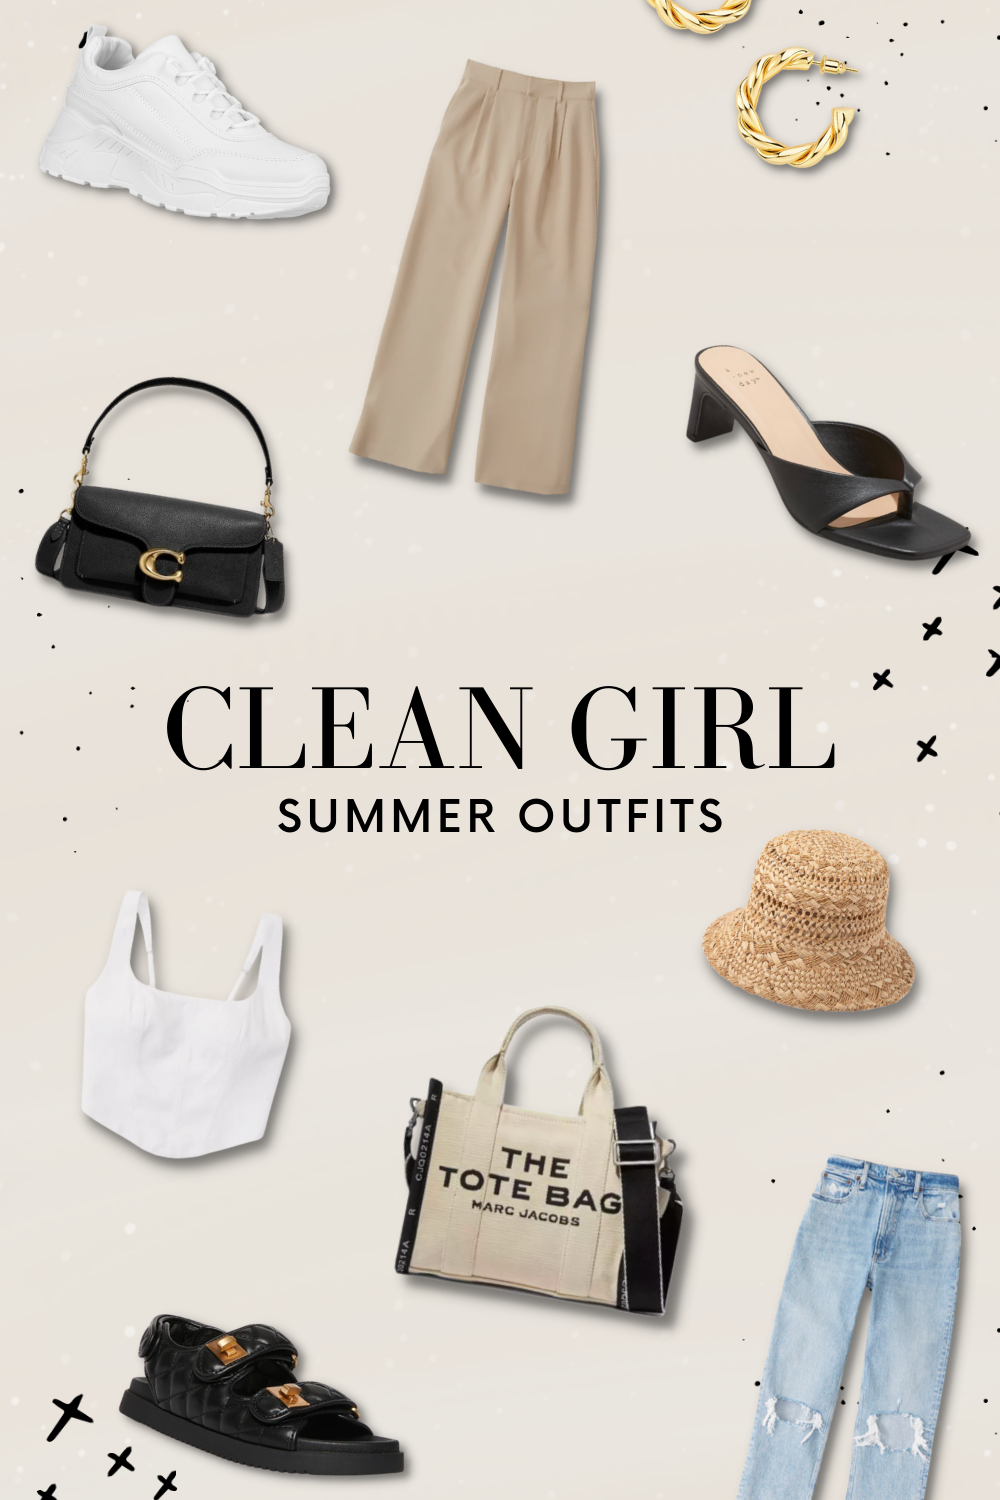 Clean girl aesthetic, chic chill outfit, chill vibes